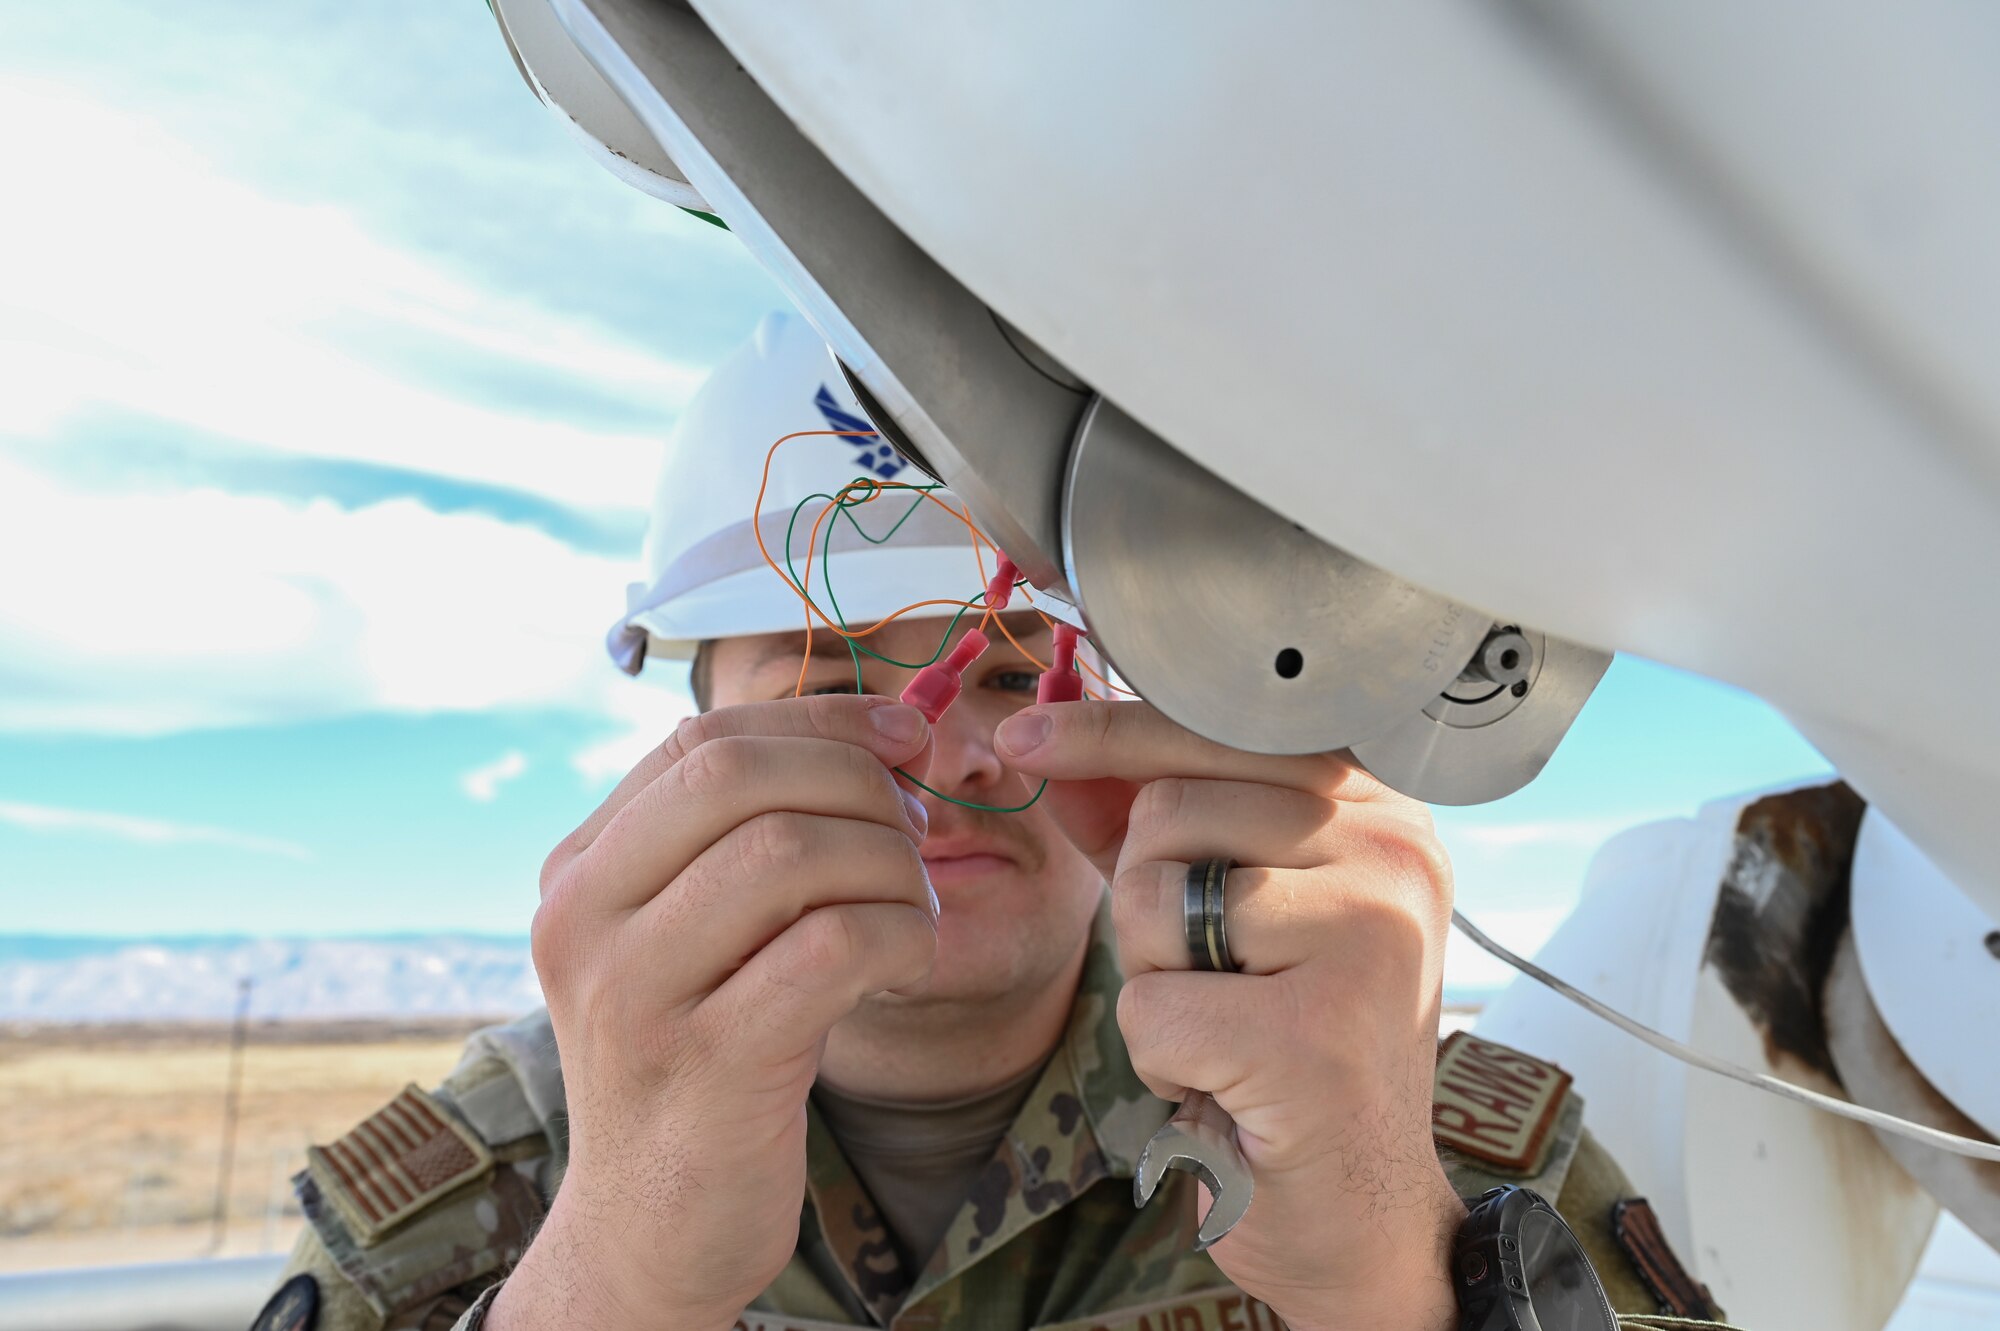 U.S. Air Force Staff Sgt. Colin Bauerle, 2nd Weather Squadron radar airfield and weather systems technician, performs maintenance on the observatory telescope at Holloman Air Force Base, New Mexico, Jan. 6, 2023. The telescope tracks and monitors any solar activity that can cause radio or electrical interferences to the Air Forces mission. (U.S. Air Force photo by Airman 1st Class Isaiah Pedrazzini)